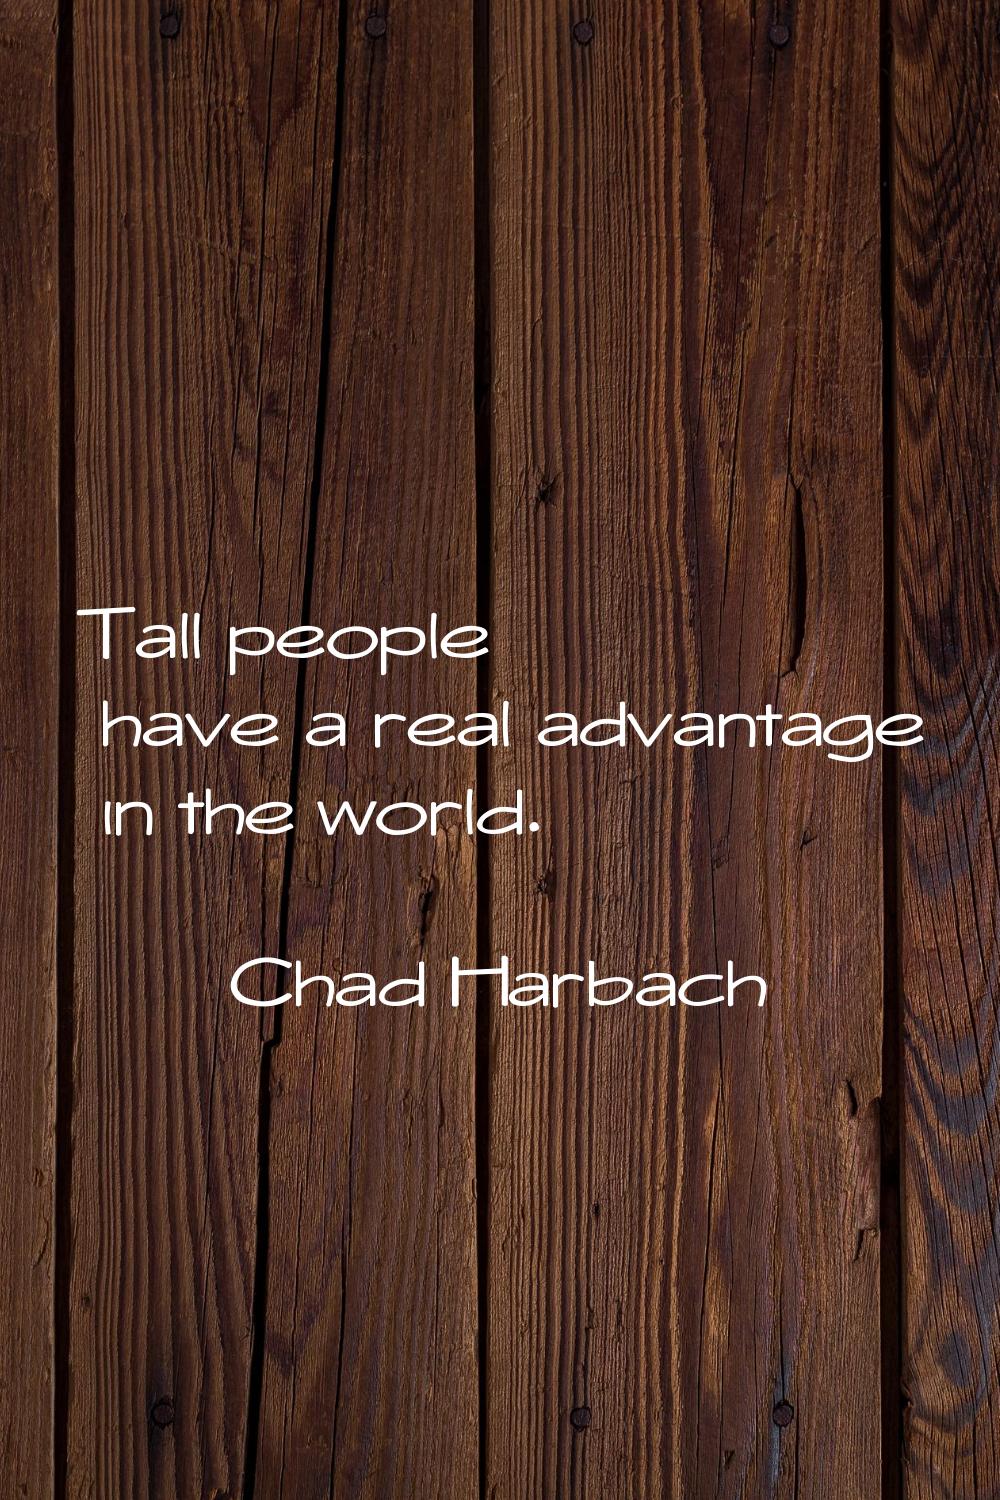 Tall people have a real advantage in the world.